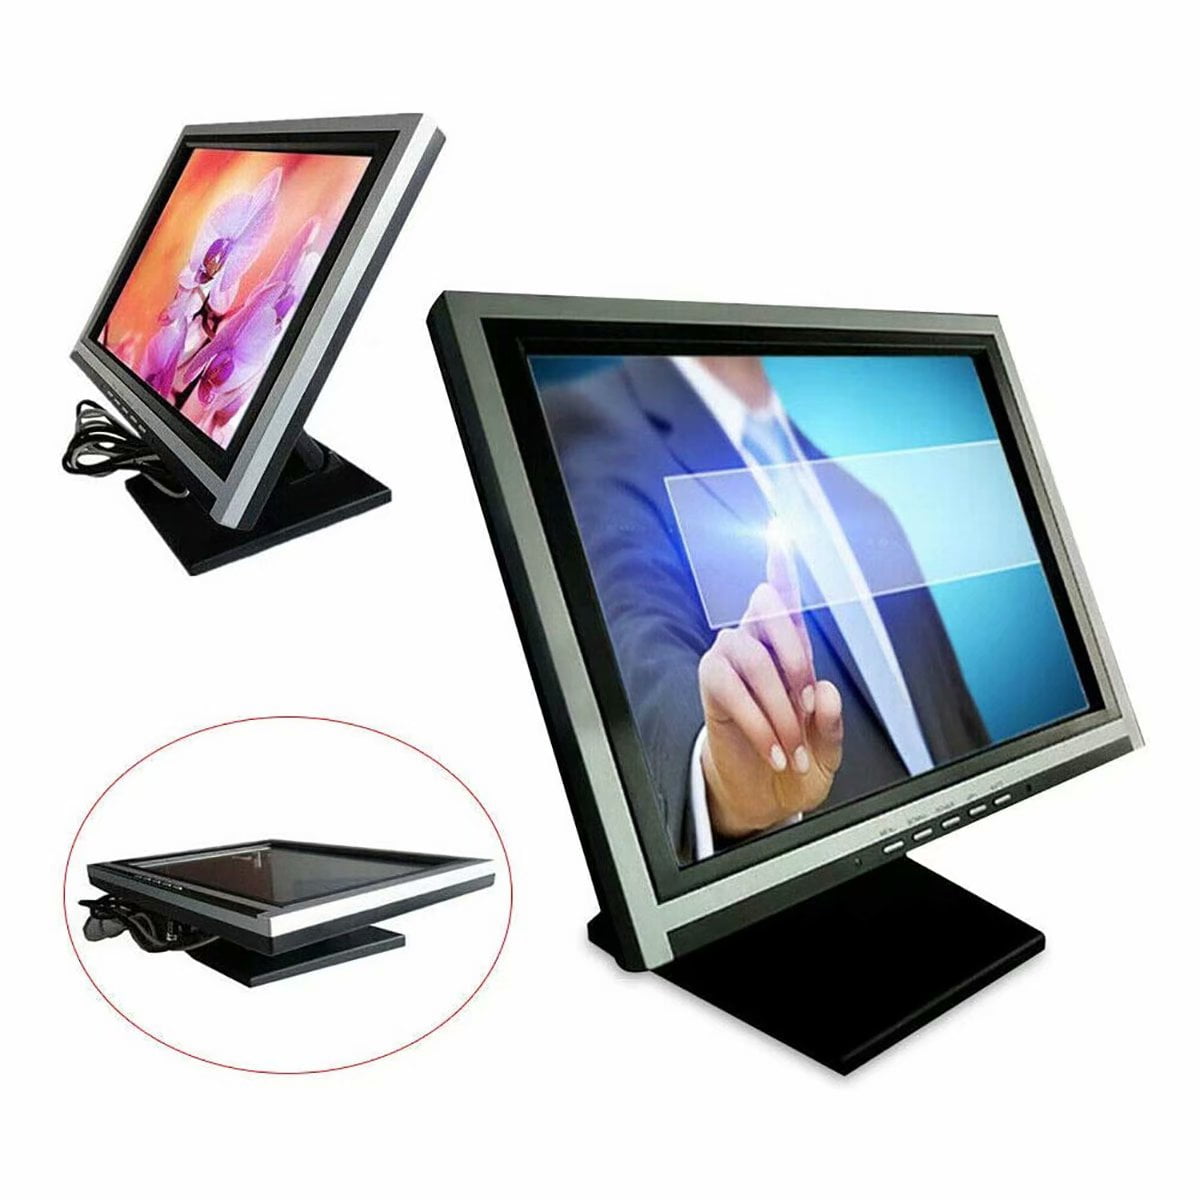 15" Touch Screen Lcd Monitor is designed for POS 